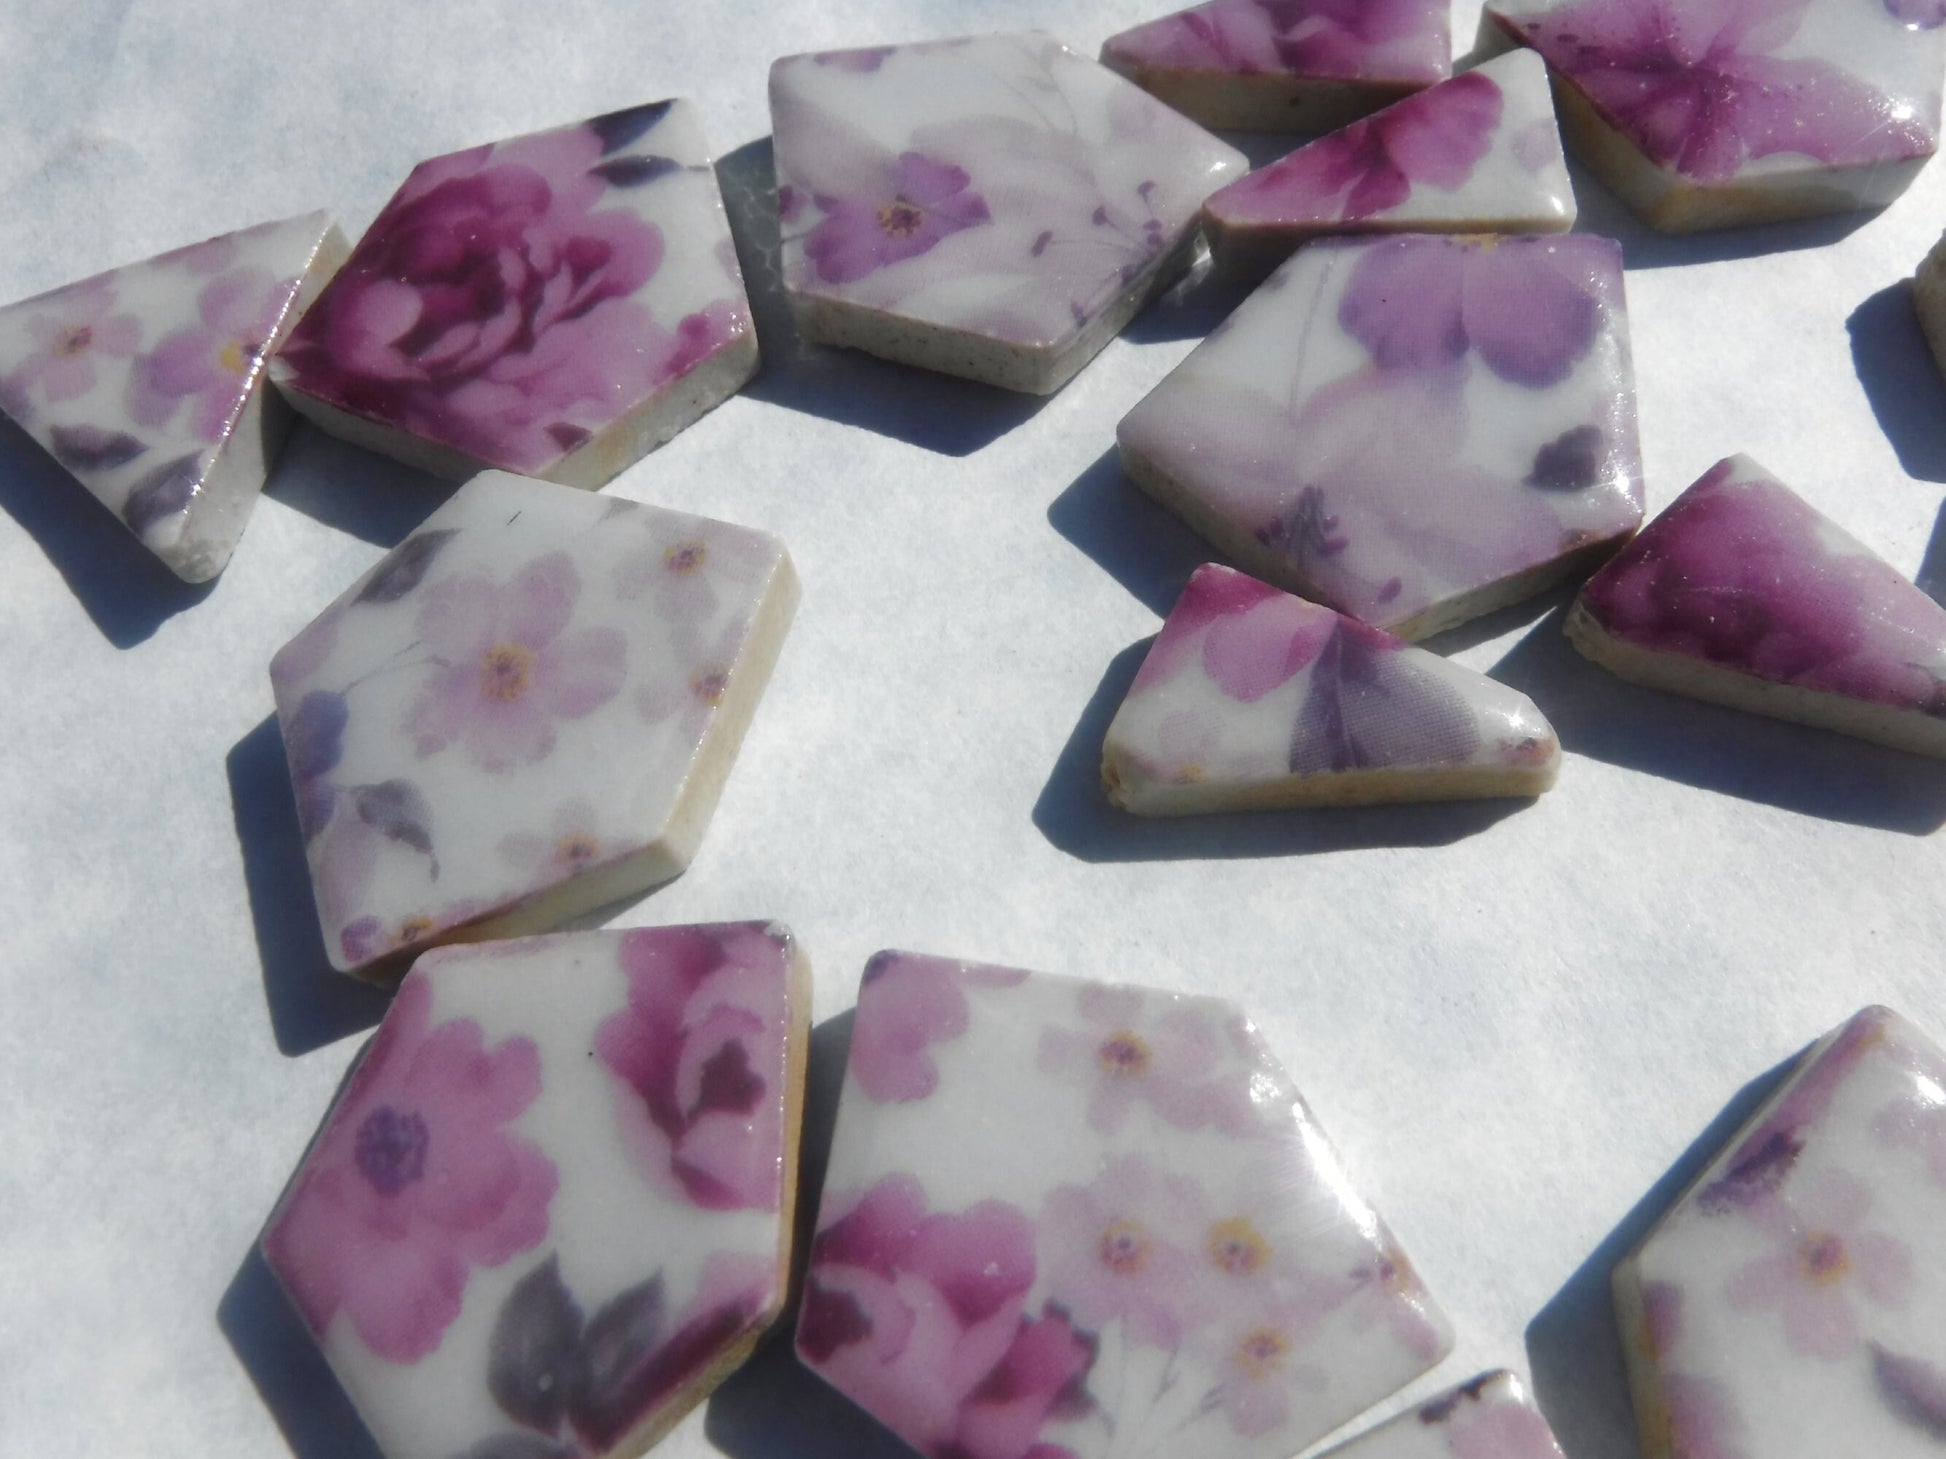 Pink and Purple Floral Chunky Mosaic Tiles in Assorted Puzzle Sizes - Half Pound